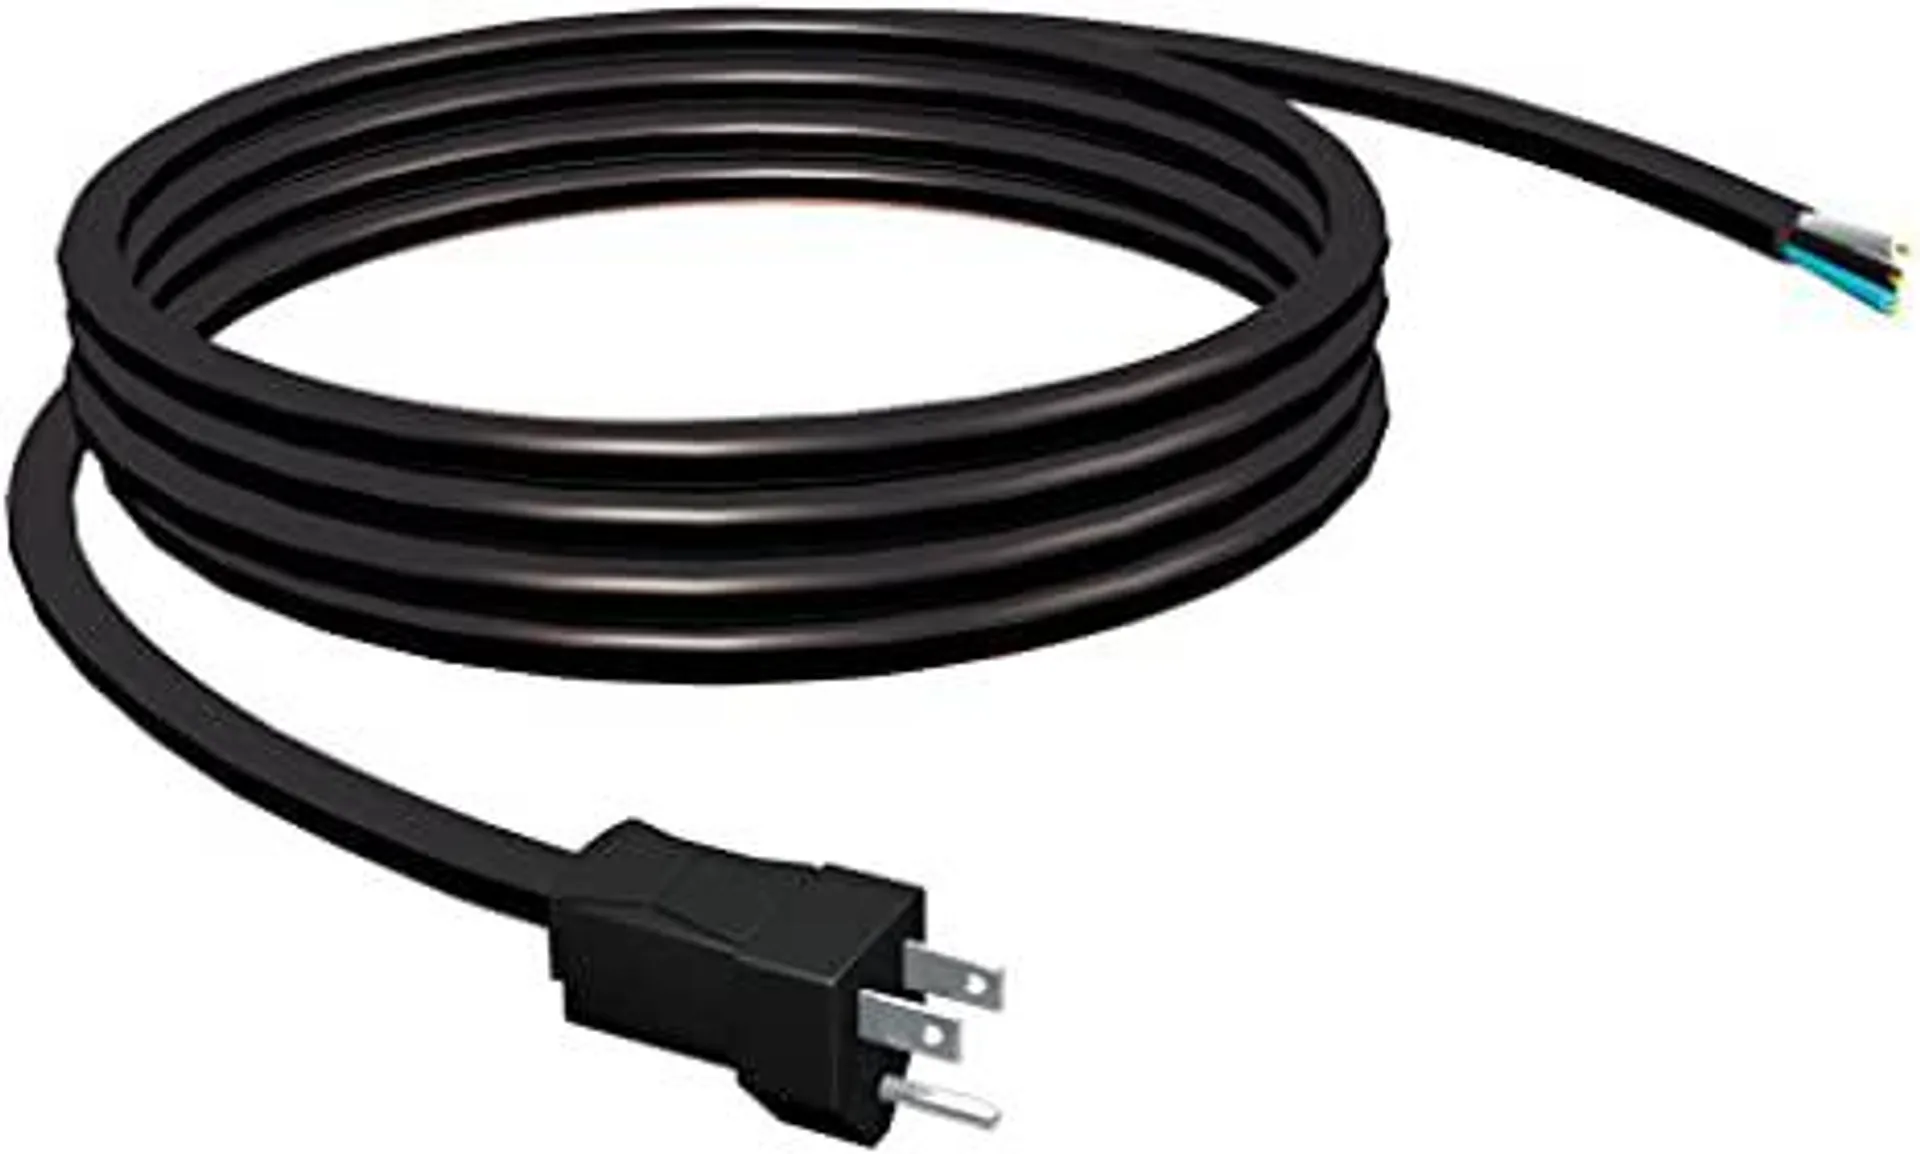 Stanley 31939 Grounded 3-Wire - 9ft. Replacement Cord 15 AMP,Black